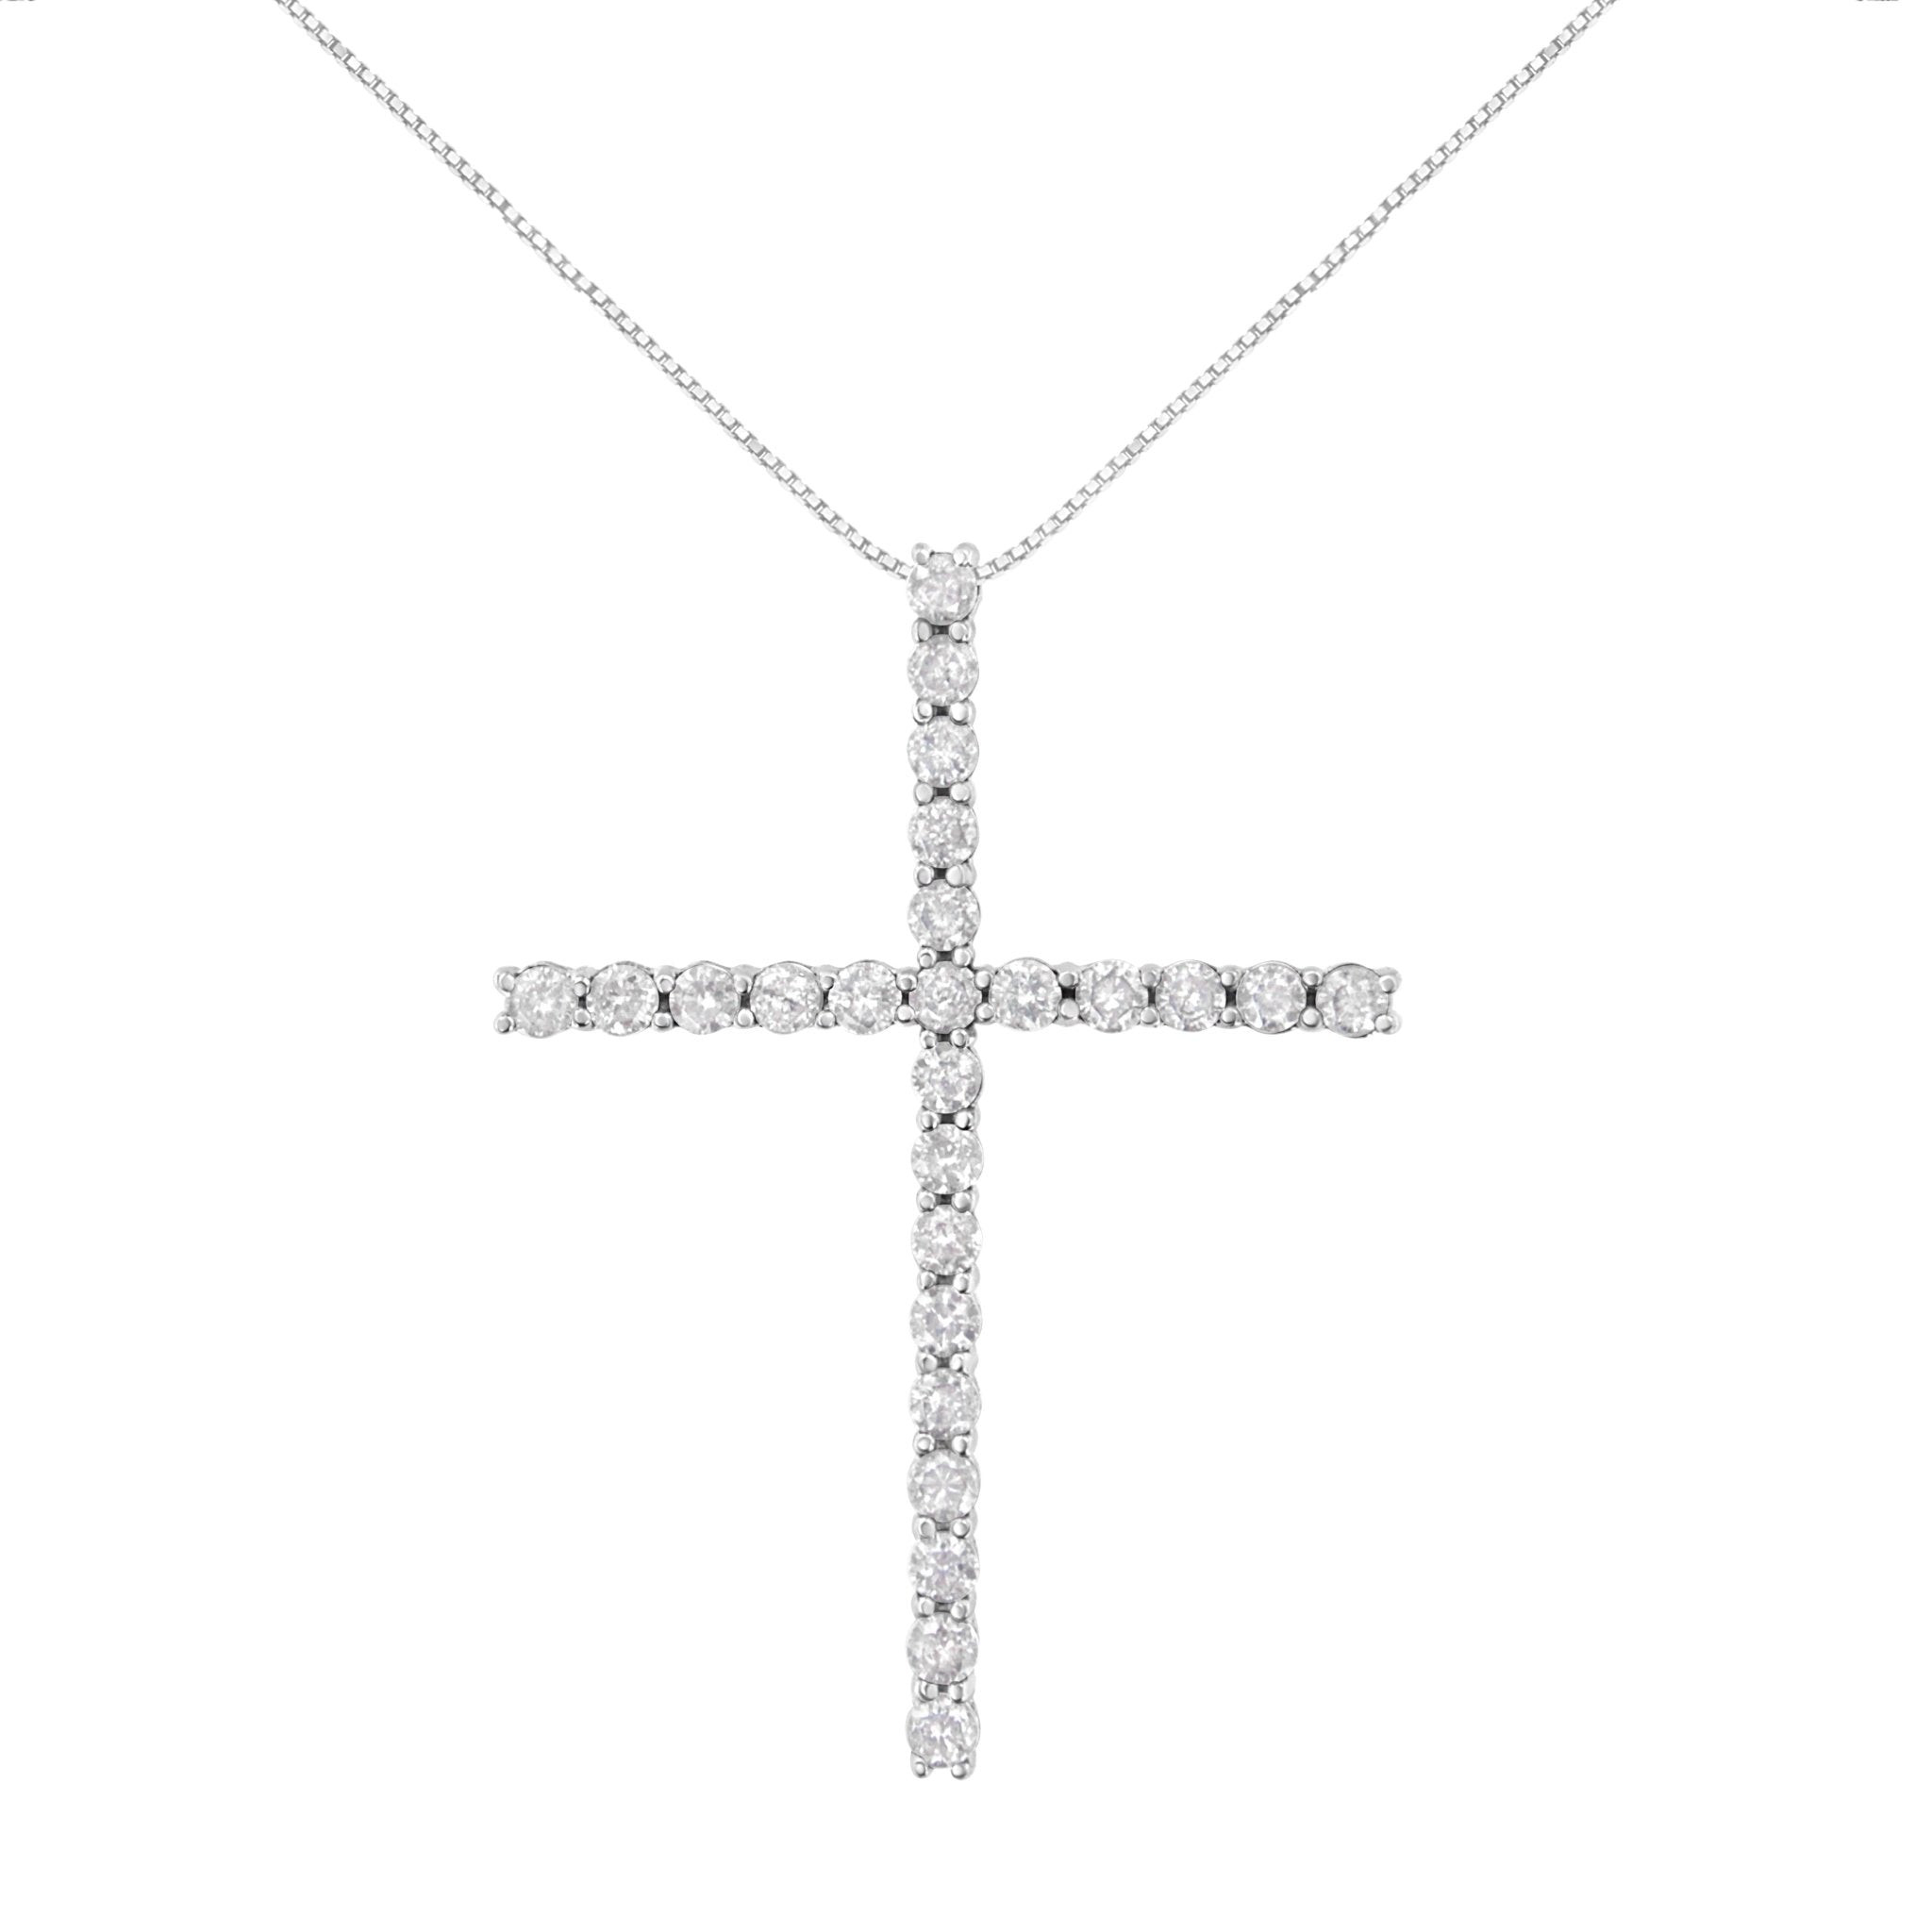 .925-Sterling-Silver-2-1/2-Cttw-Diamond-Cross-Pendant-Necklace-(H-I,-I2-I3)-Pendants-&-Charms